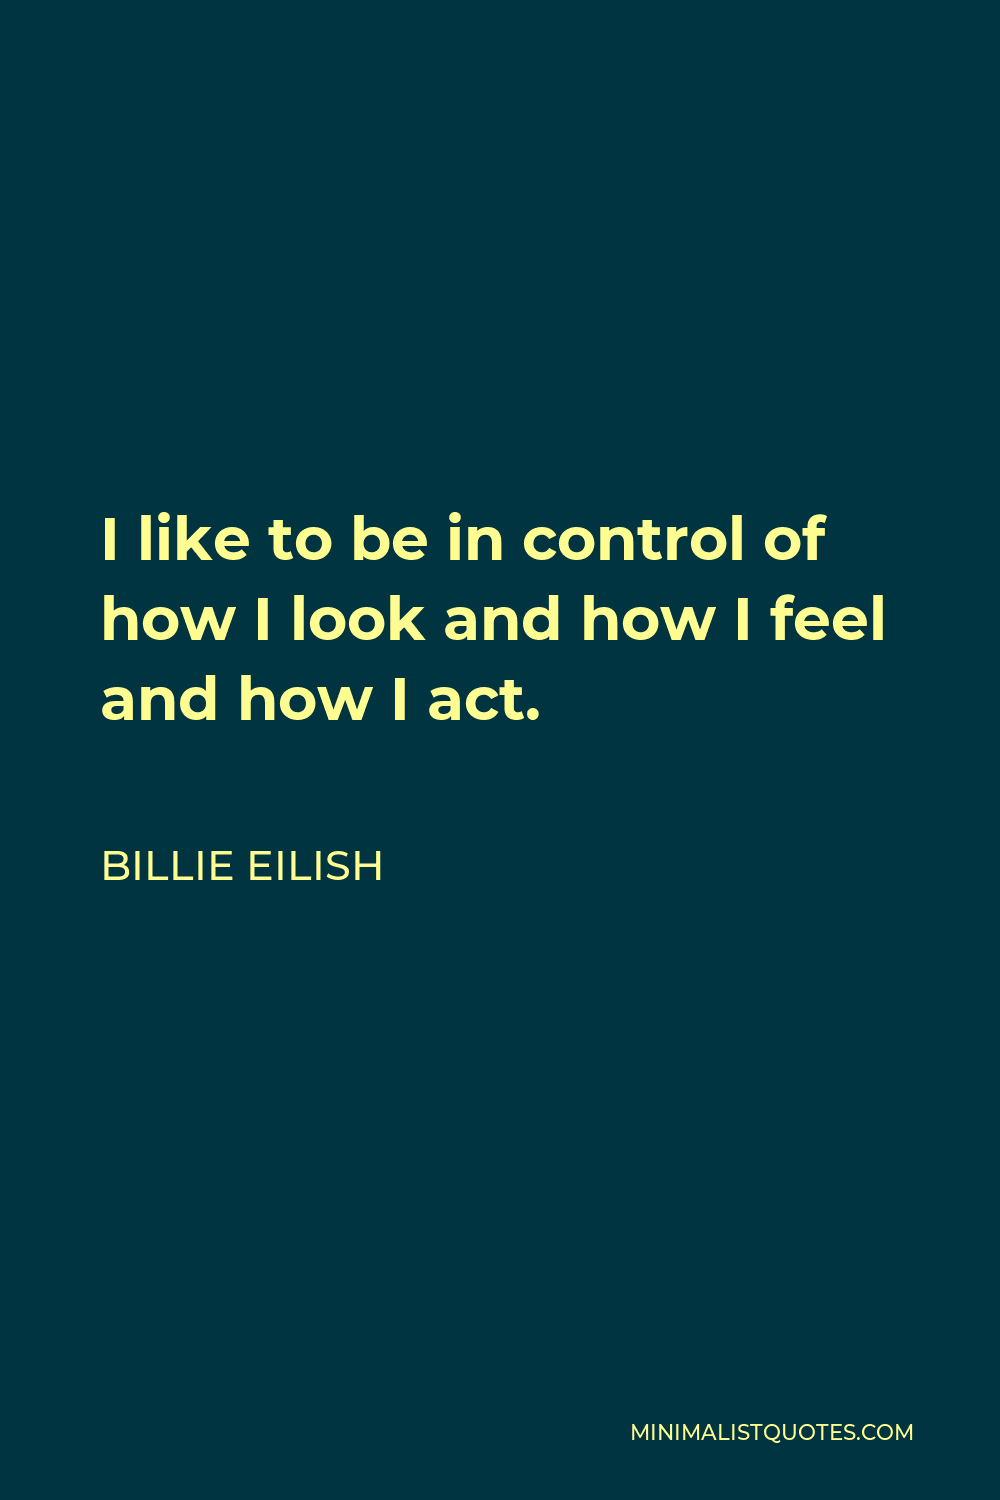 Billie Eilish Quote - I like to be in control of how I look and how I feel and how I act.